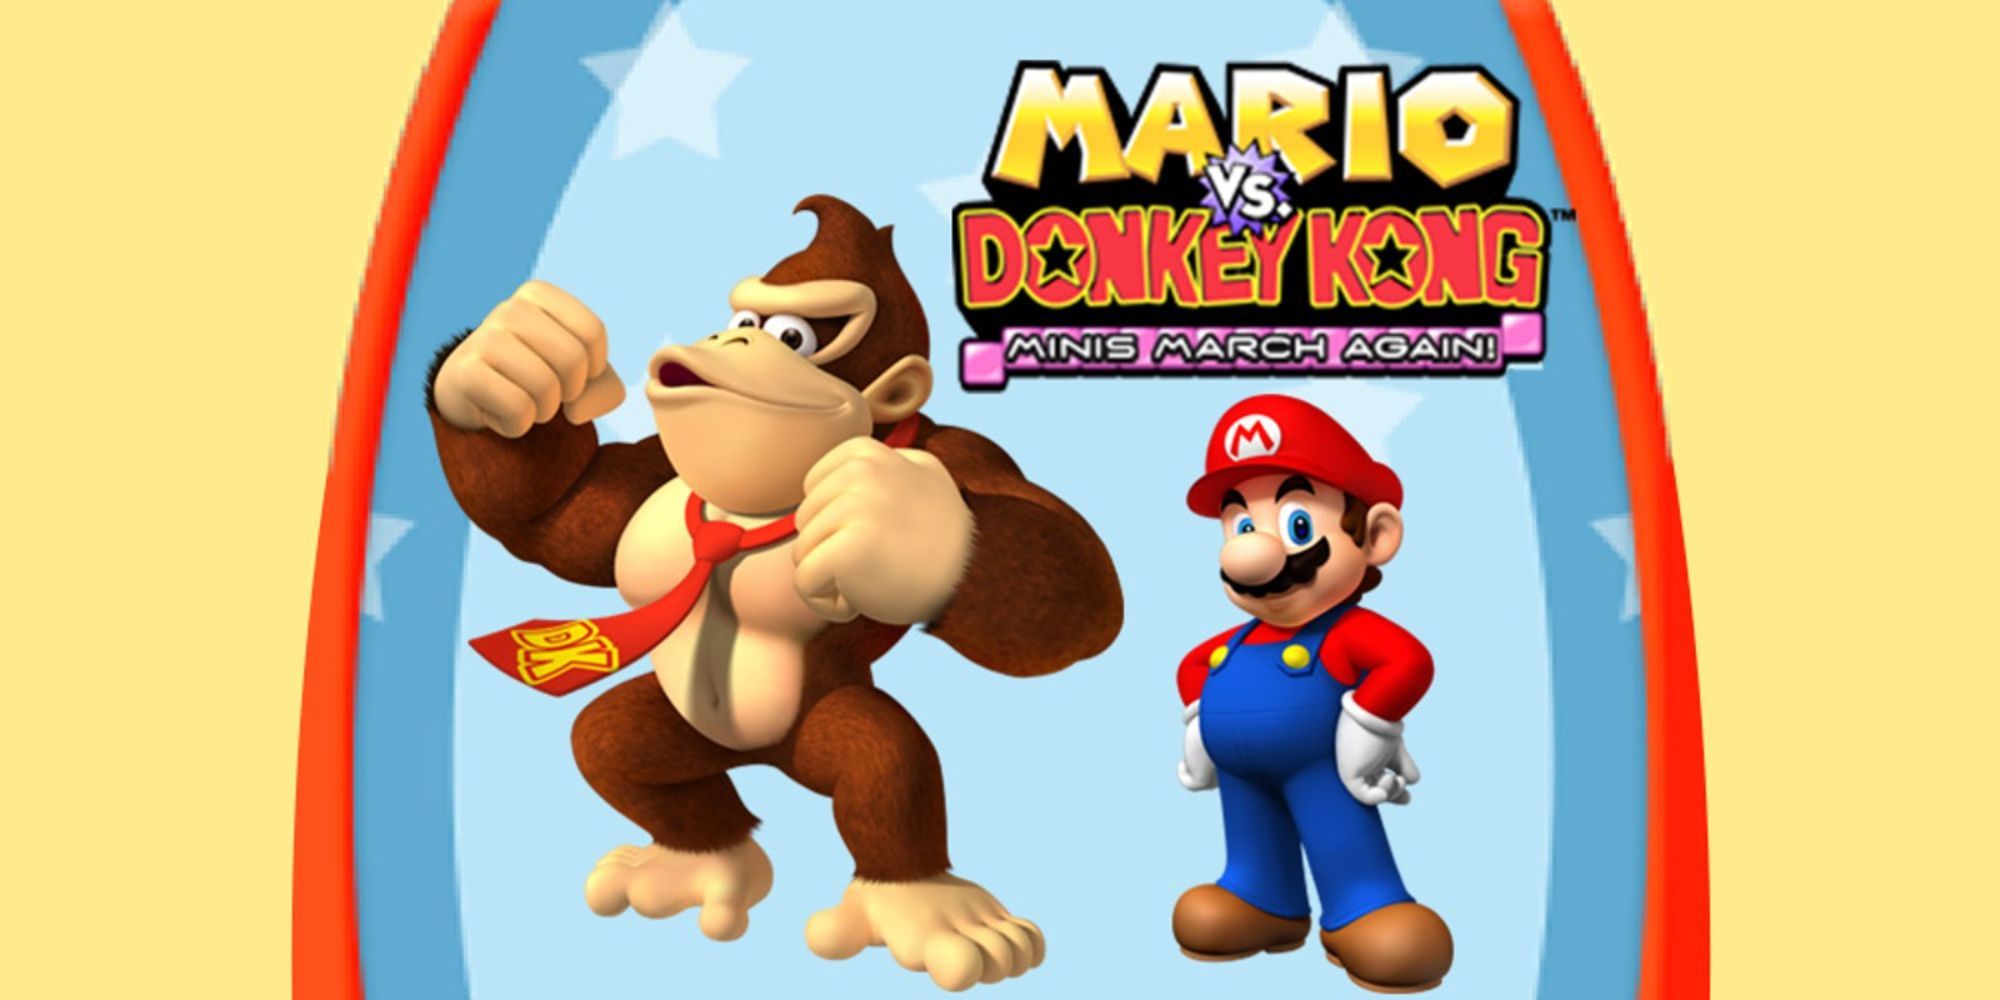 Donkey Kong stood beside Mario on the Minis March Again cover